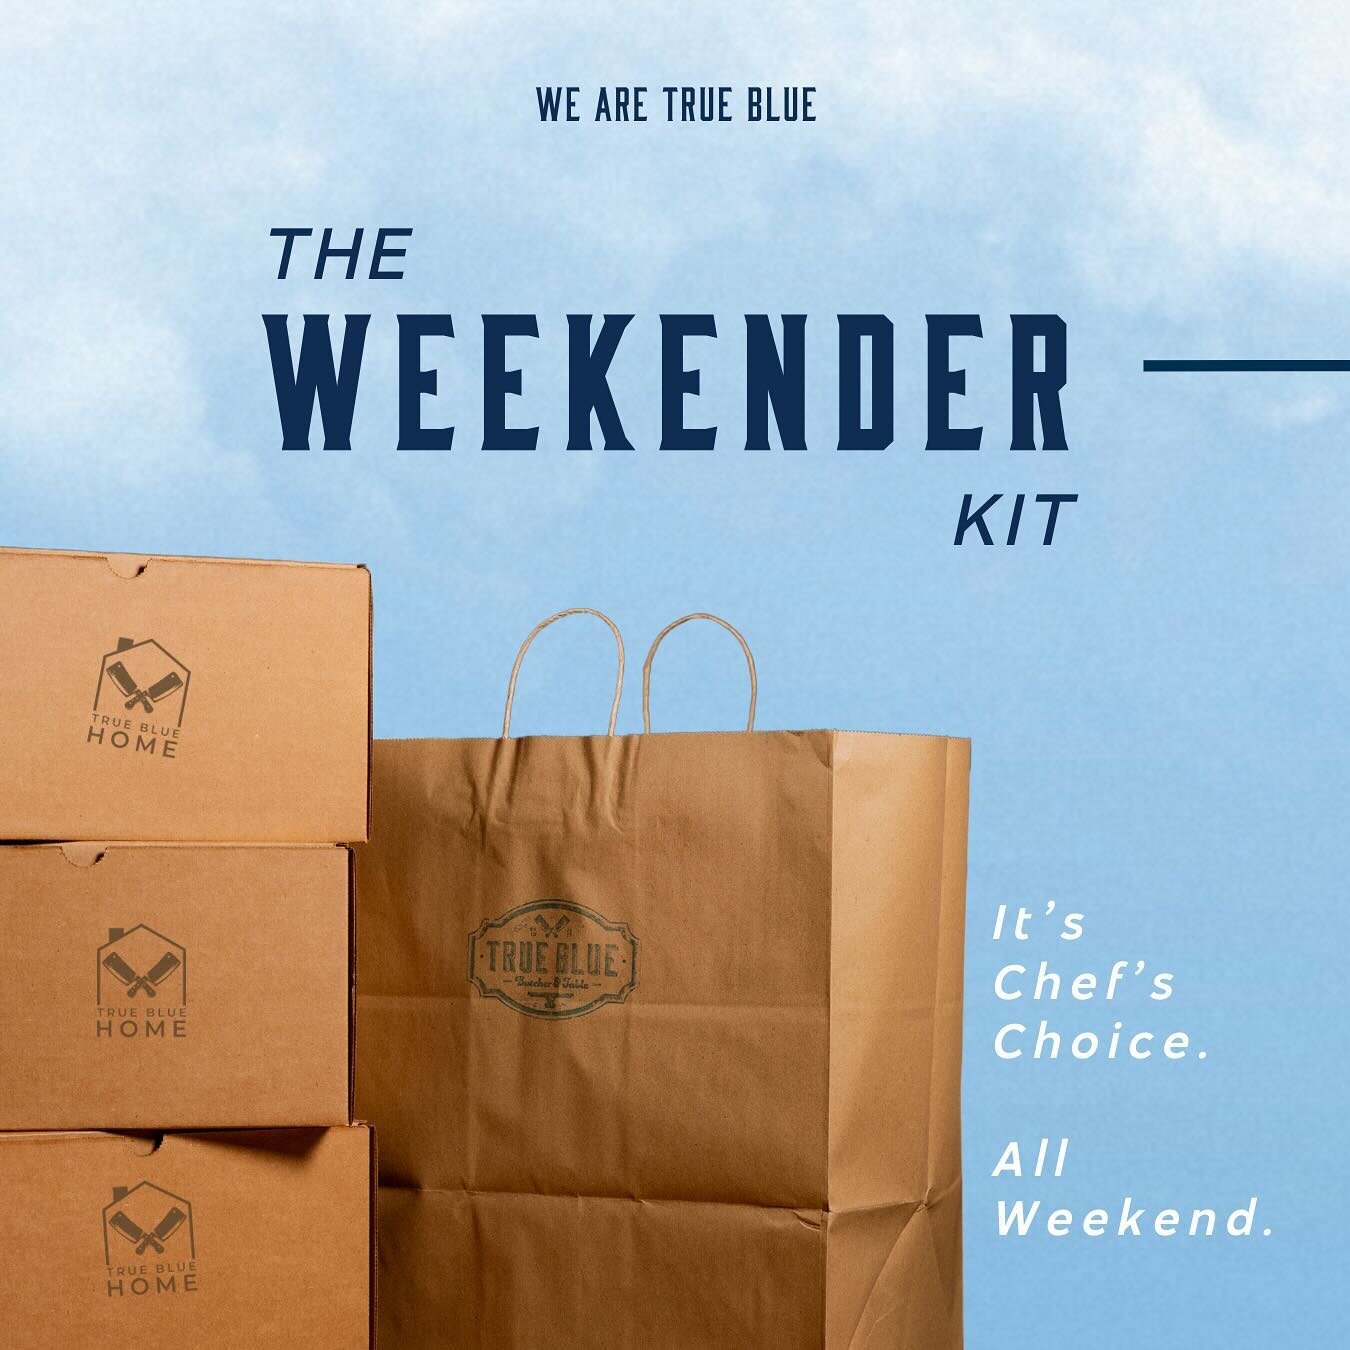 Introducing The WEEKENDER Kit! 🤩 No more stressing about meals on a busy weekend. Elevate your dining experience at home with plenty of quality ingredients, mouthwatering flavors, and home-made cuisine. SWIPE to check out what&rsquo;s included! You&